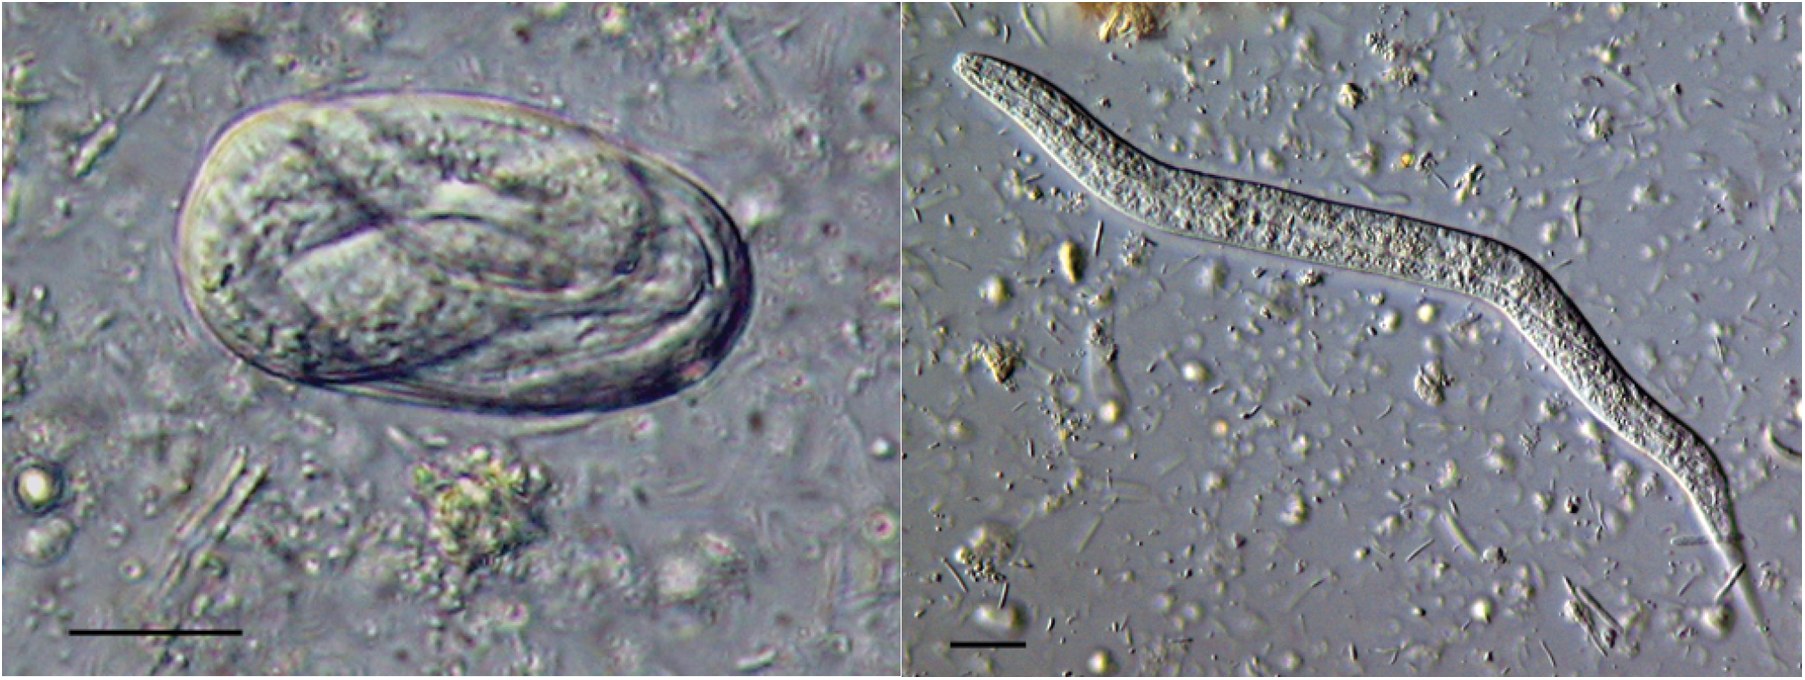 Helminths-strongyloides stercoralis